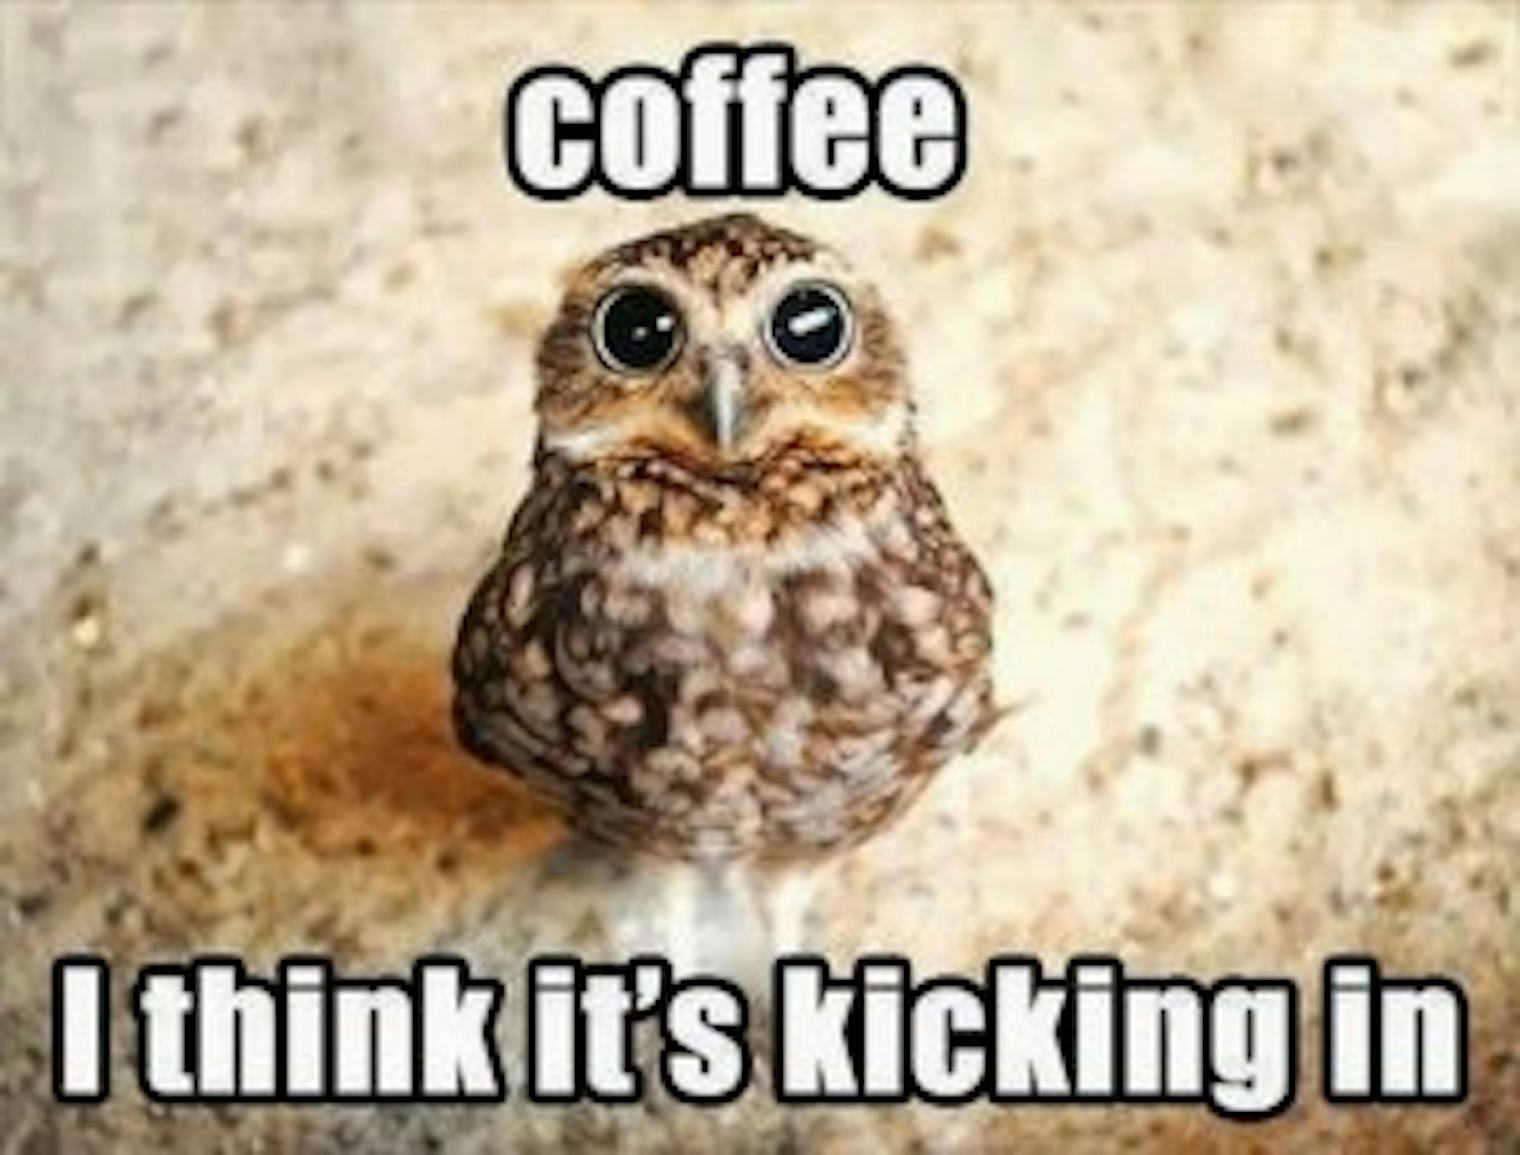 15 National Coffee Day Memes That Prove Caffeine Is A Way Of Life